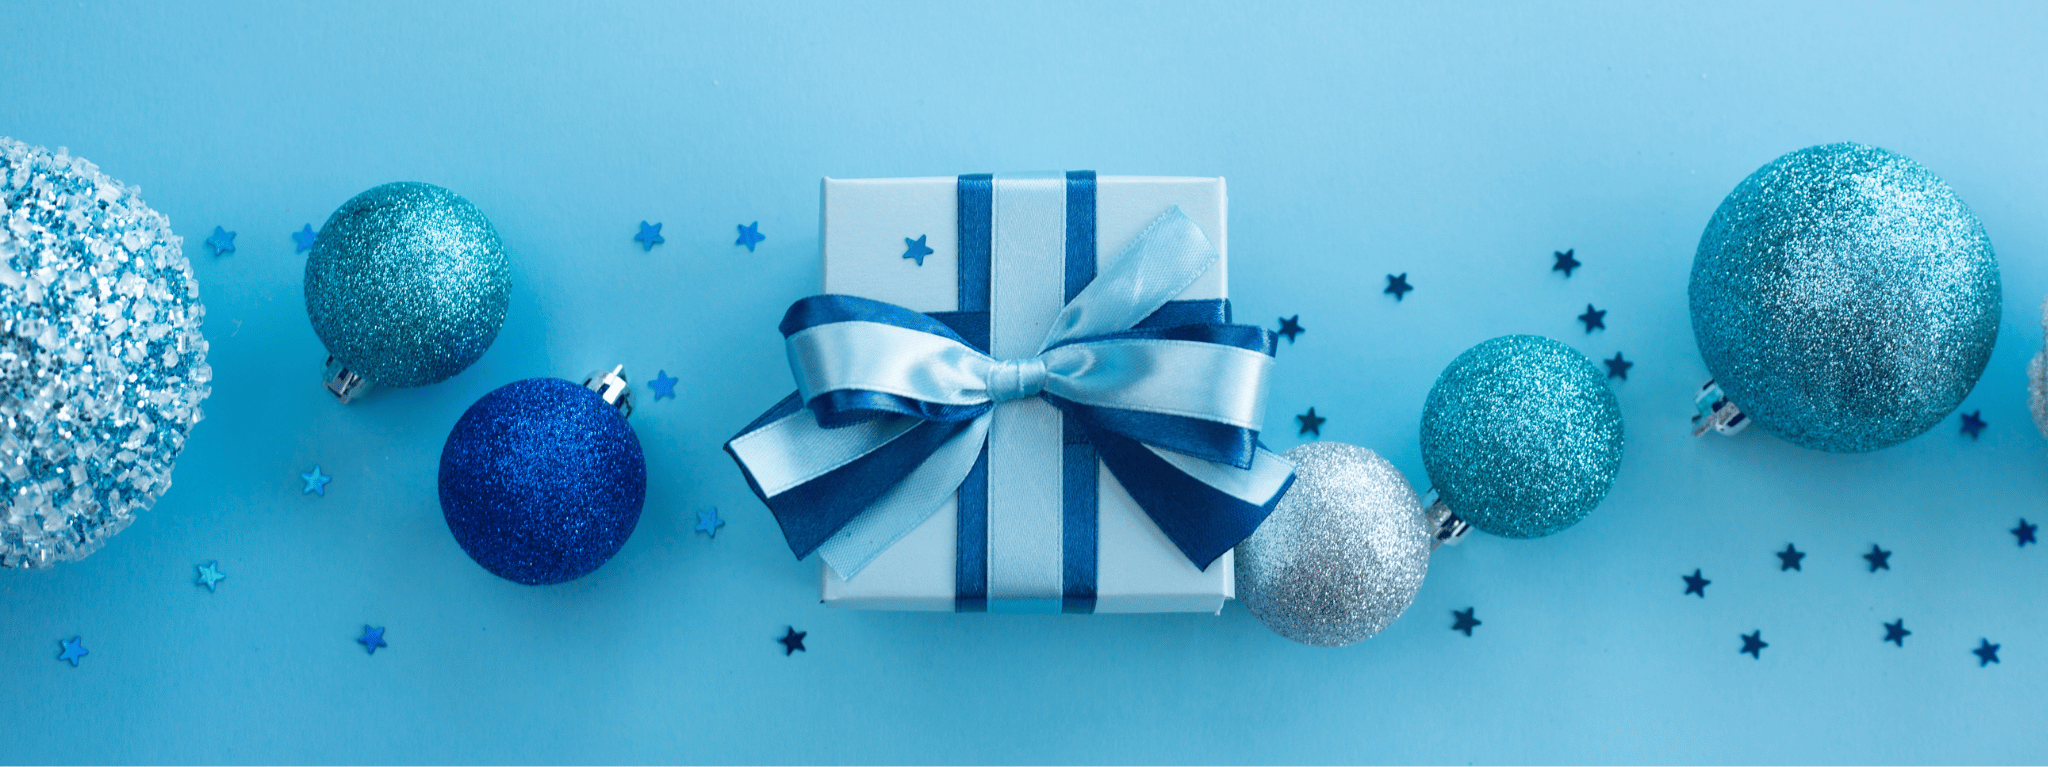 holiday giveaway background with blue and silver ornaments and a blue present and confetti